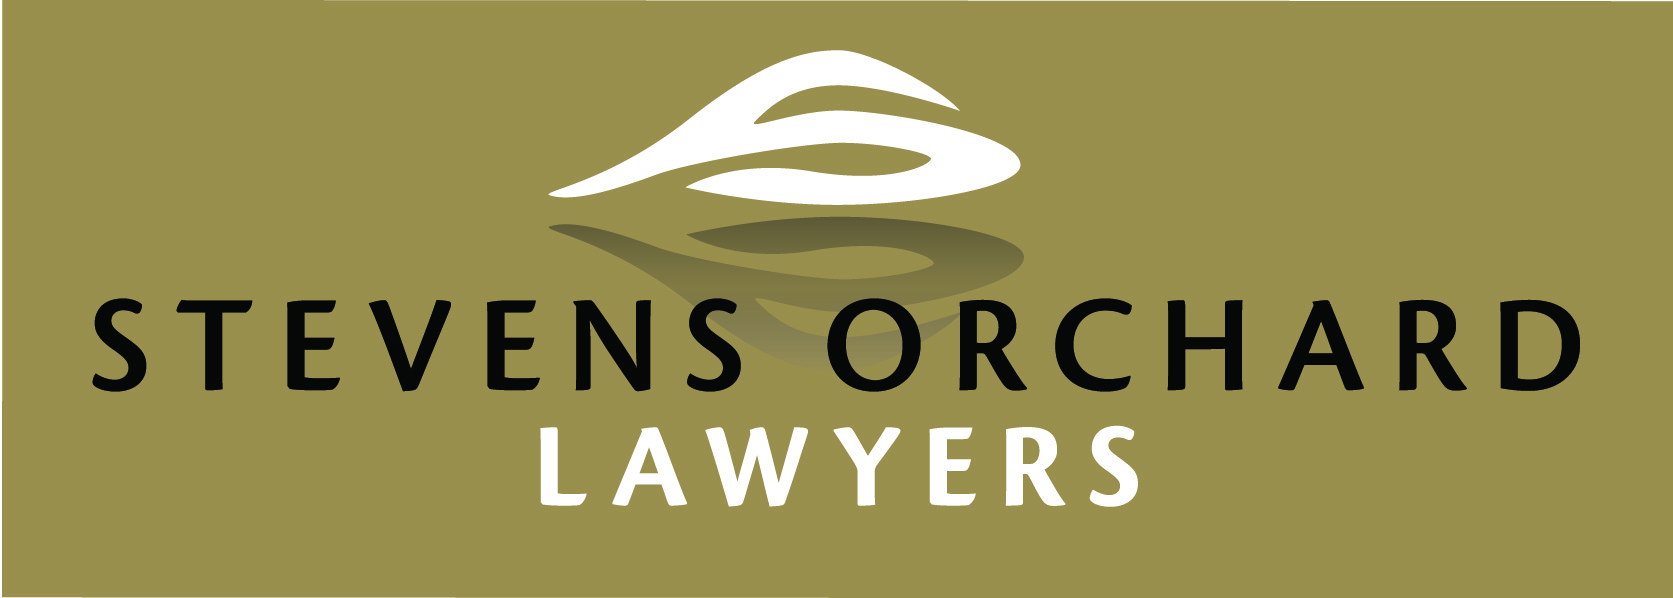 Business logo for Stevens Orchard Lawyers